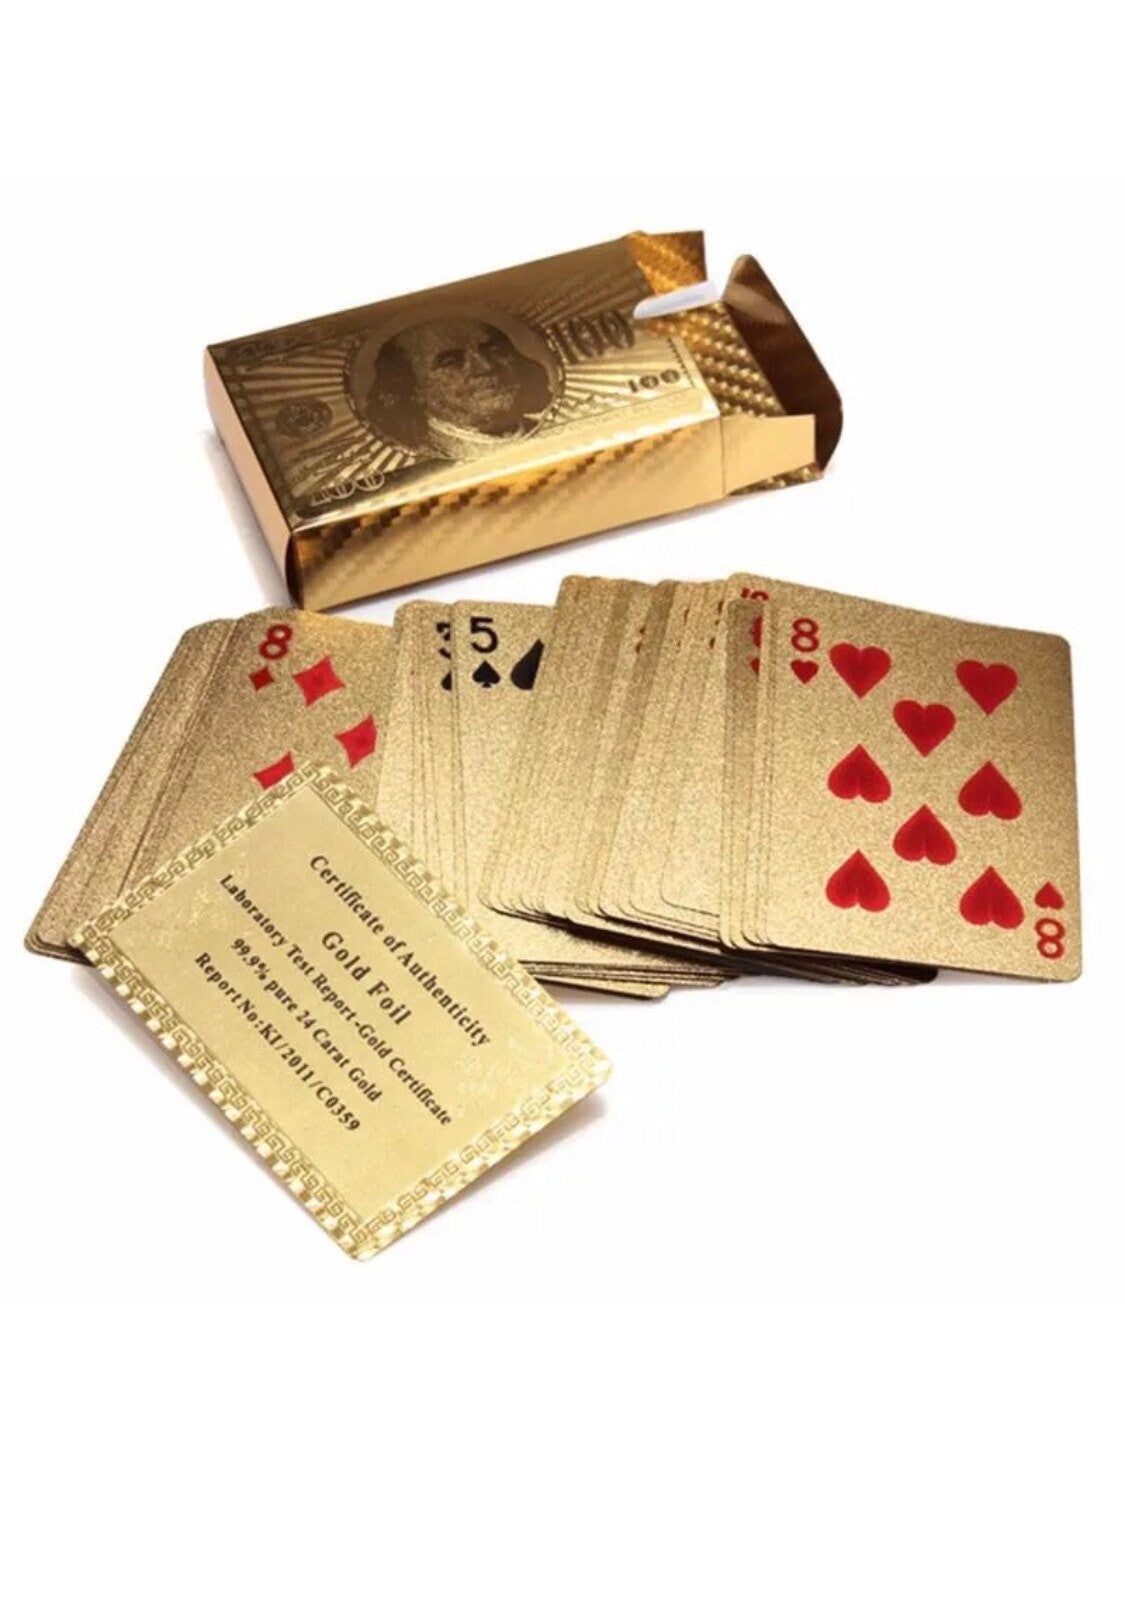 Real 24k Gold Foil playing cards, Stocking stuffer, gift for someone who has everything, authenticity card & box, gift for him Free Shipping